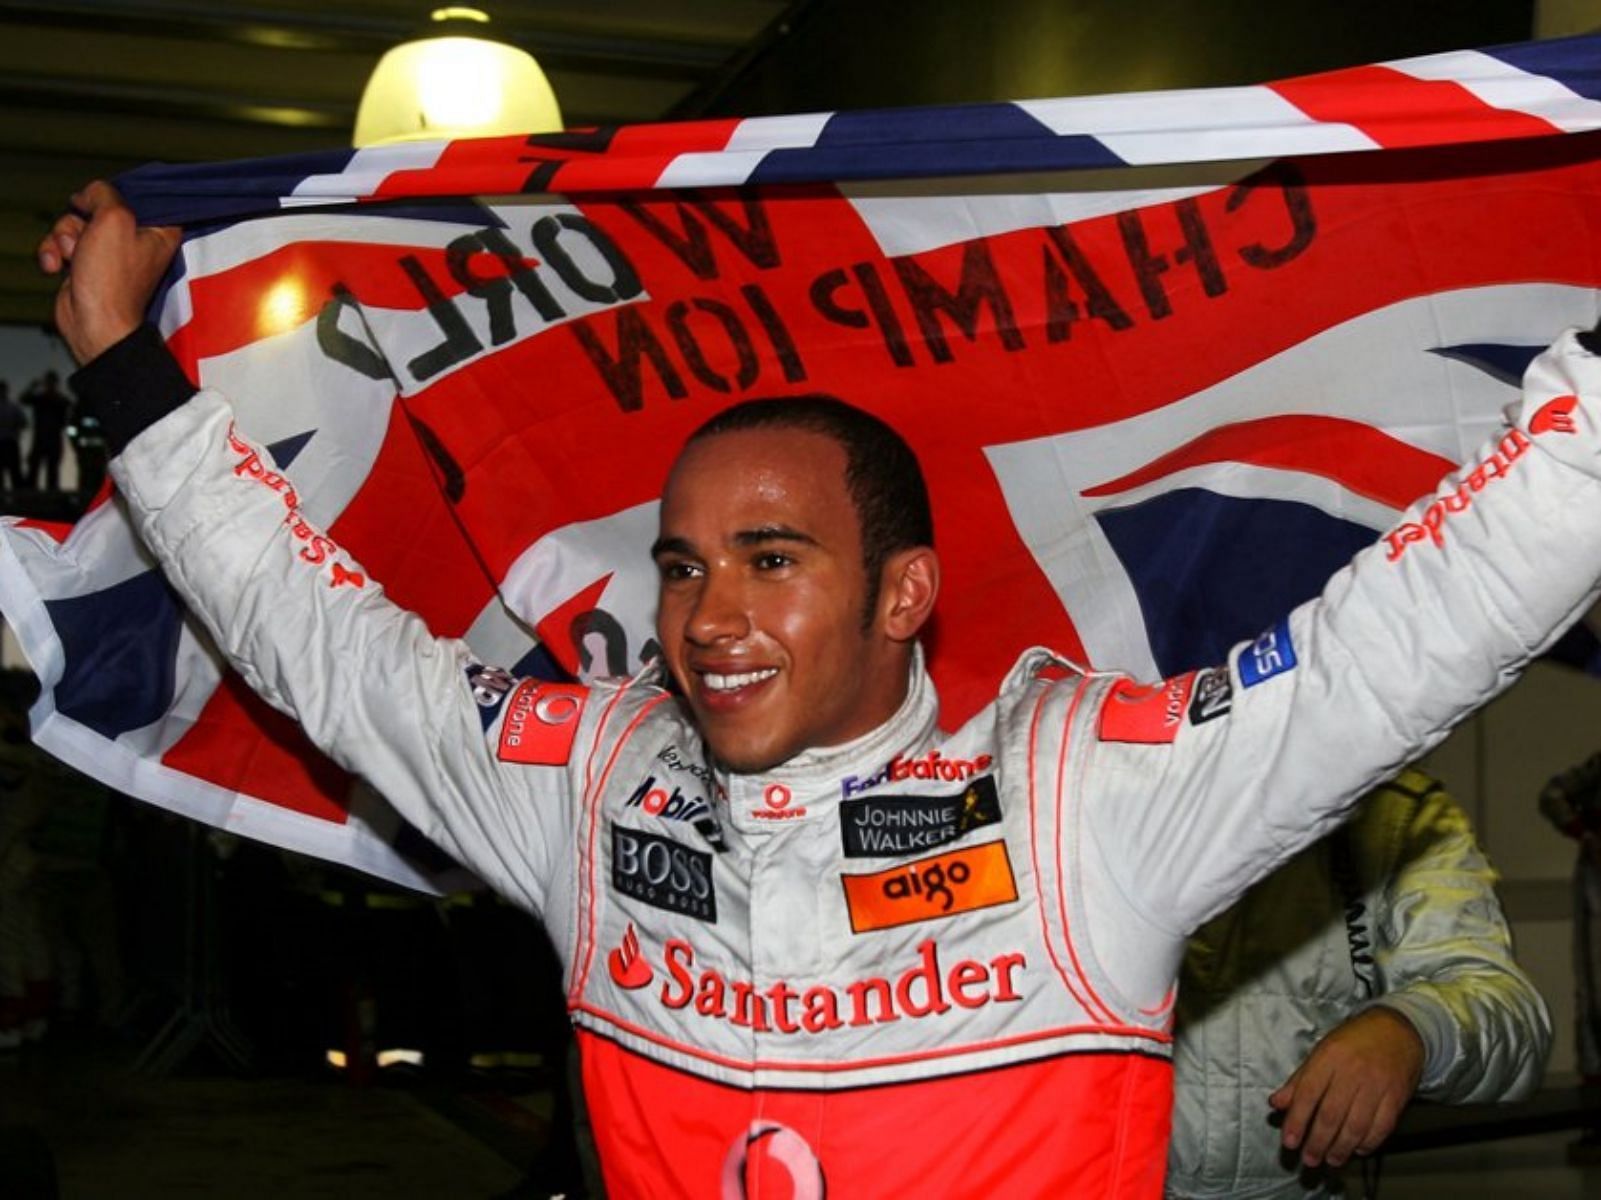 Lewis Hamilton when he won his first world championship in 2008 F1 season with McLaren (Image via Twitter/@F1)